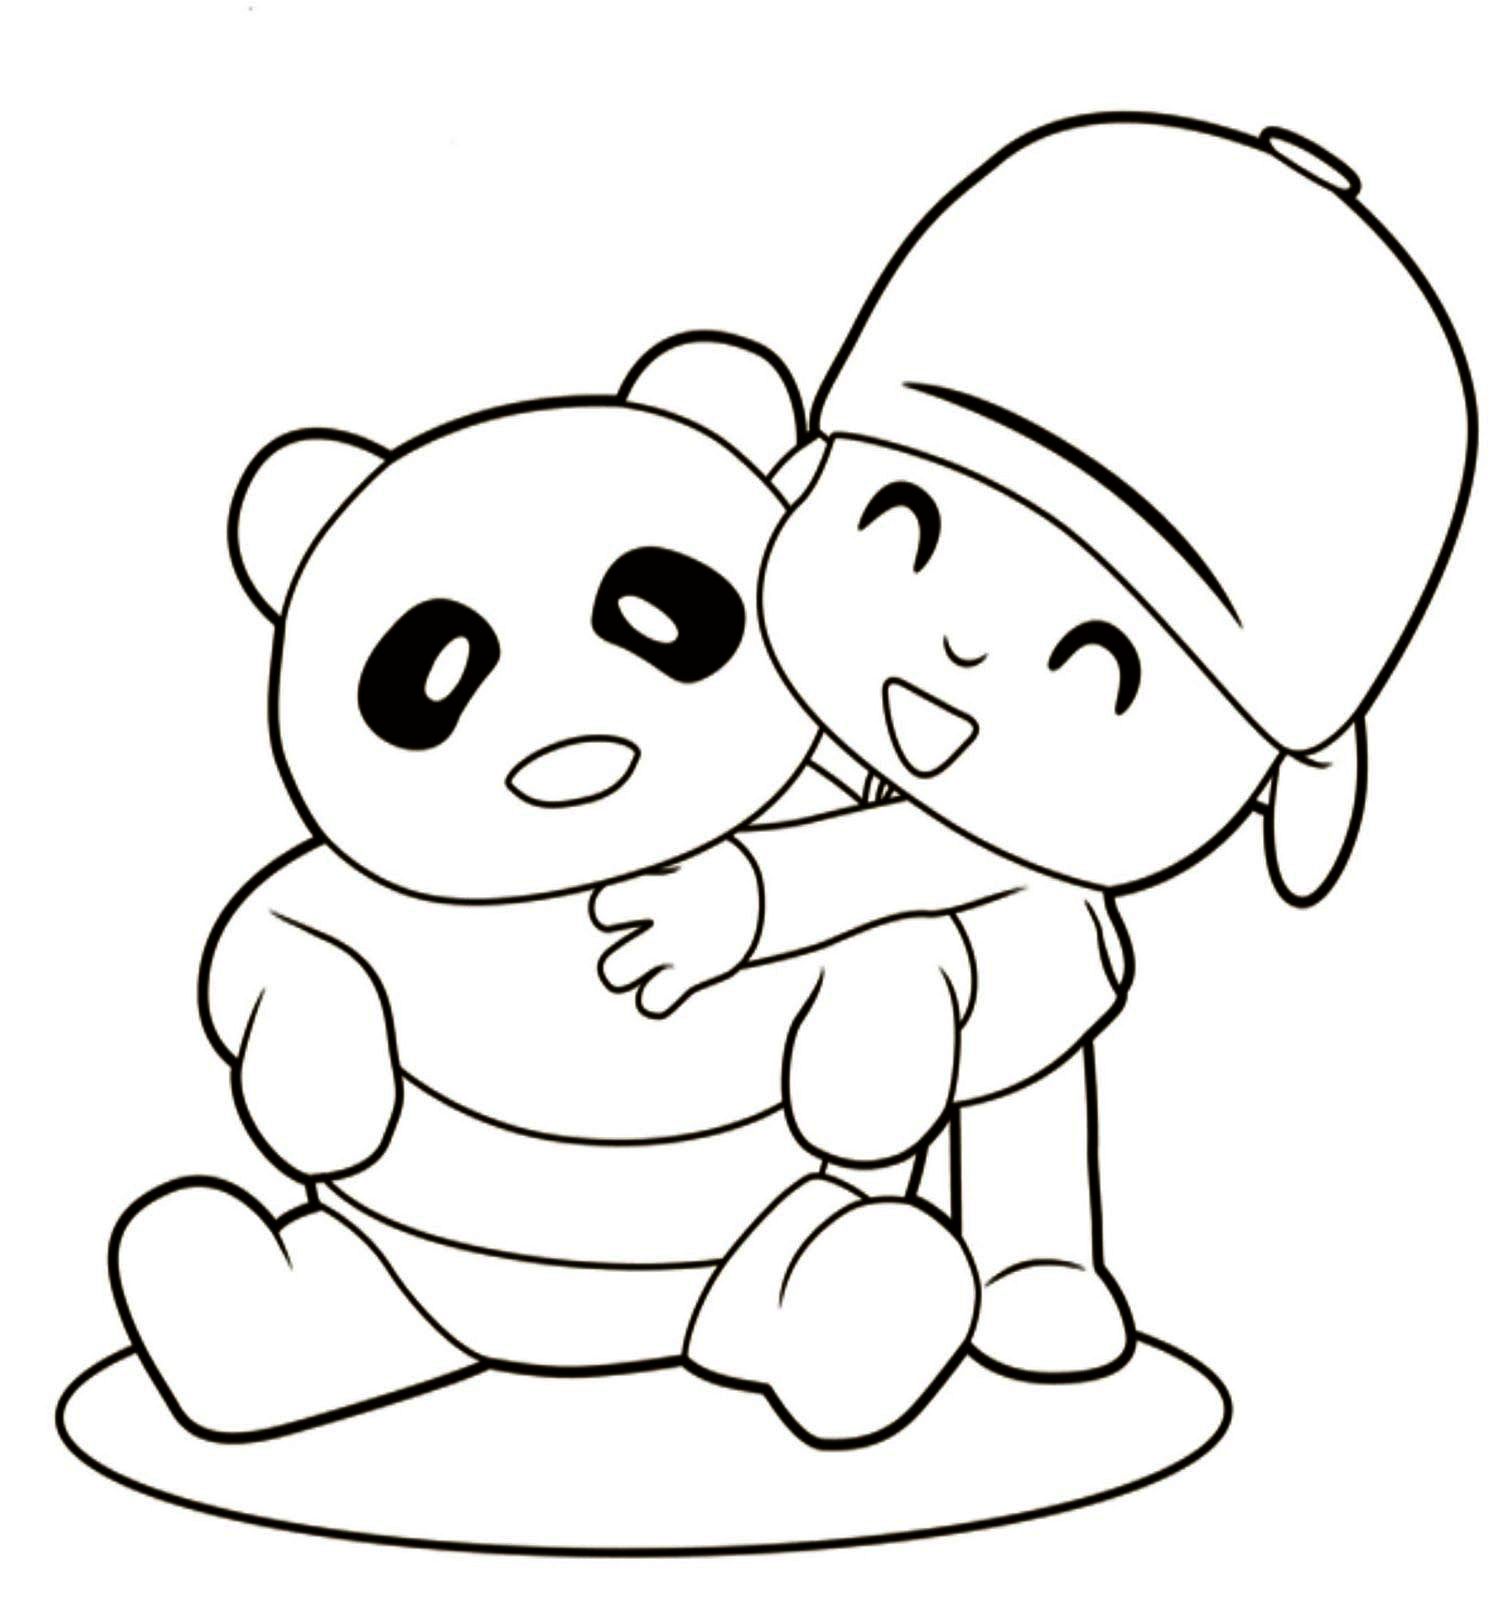 pocoyo coloring pages to print